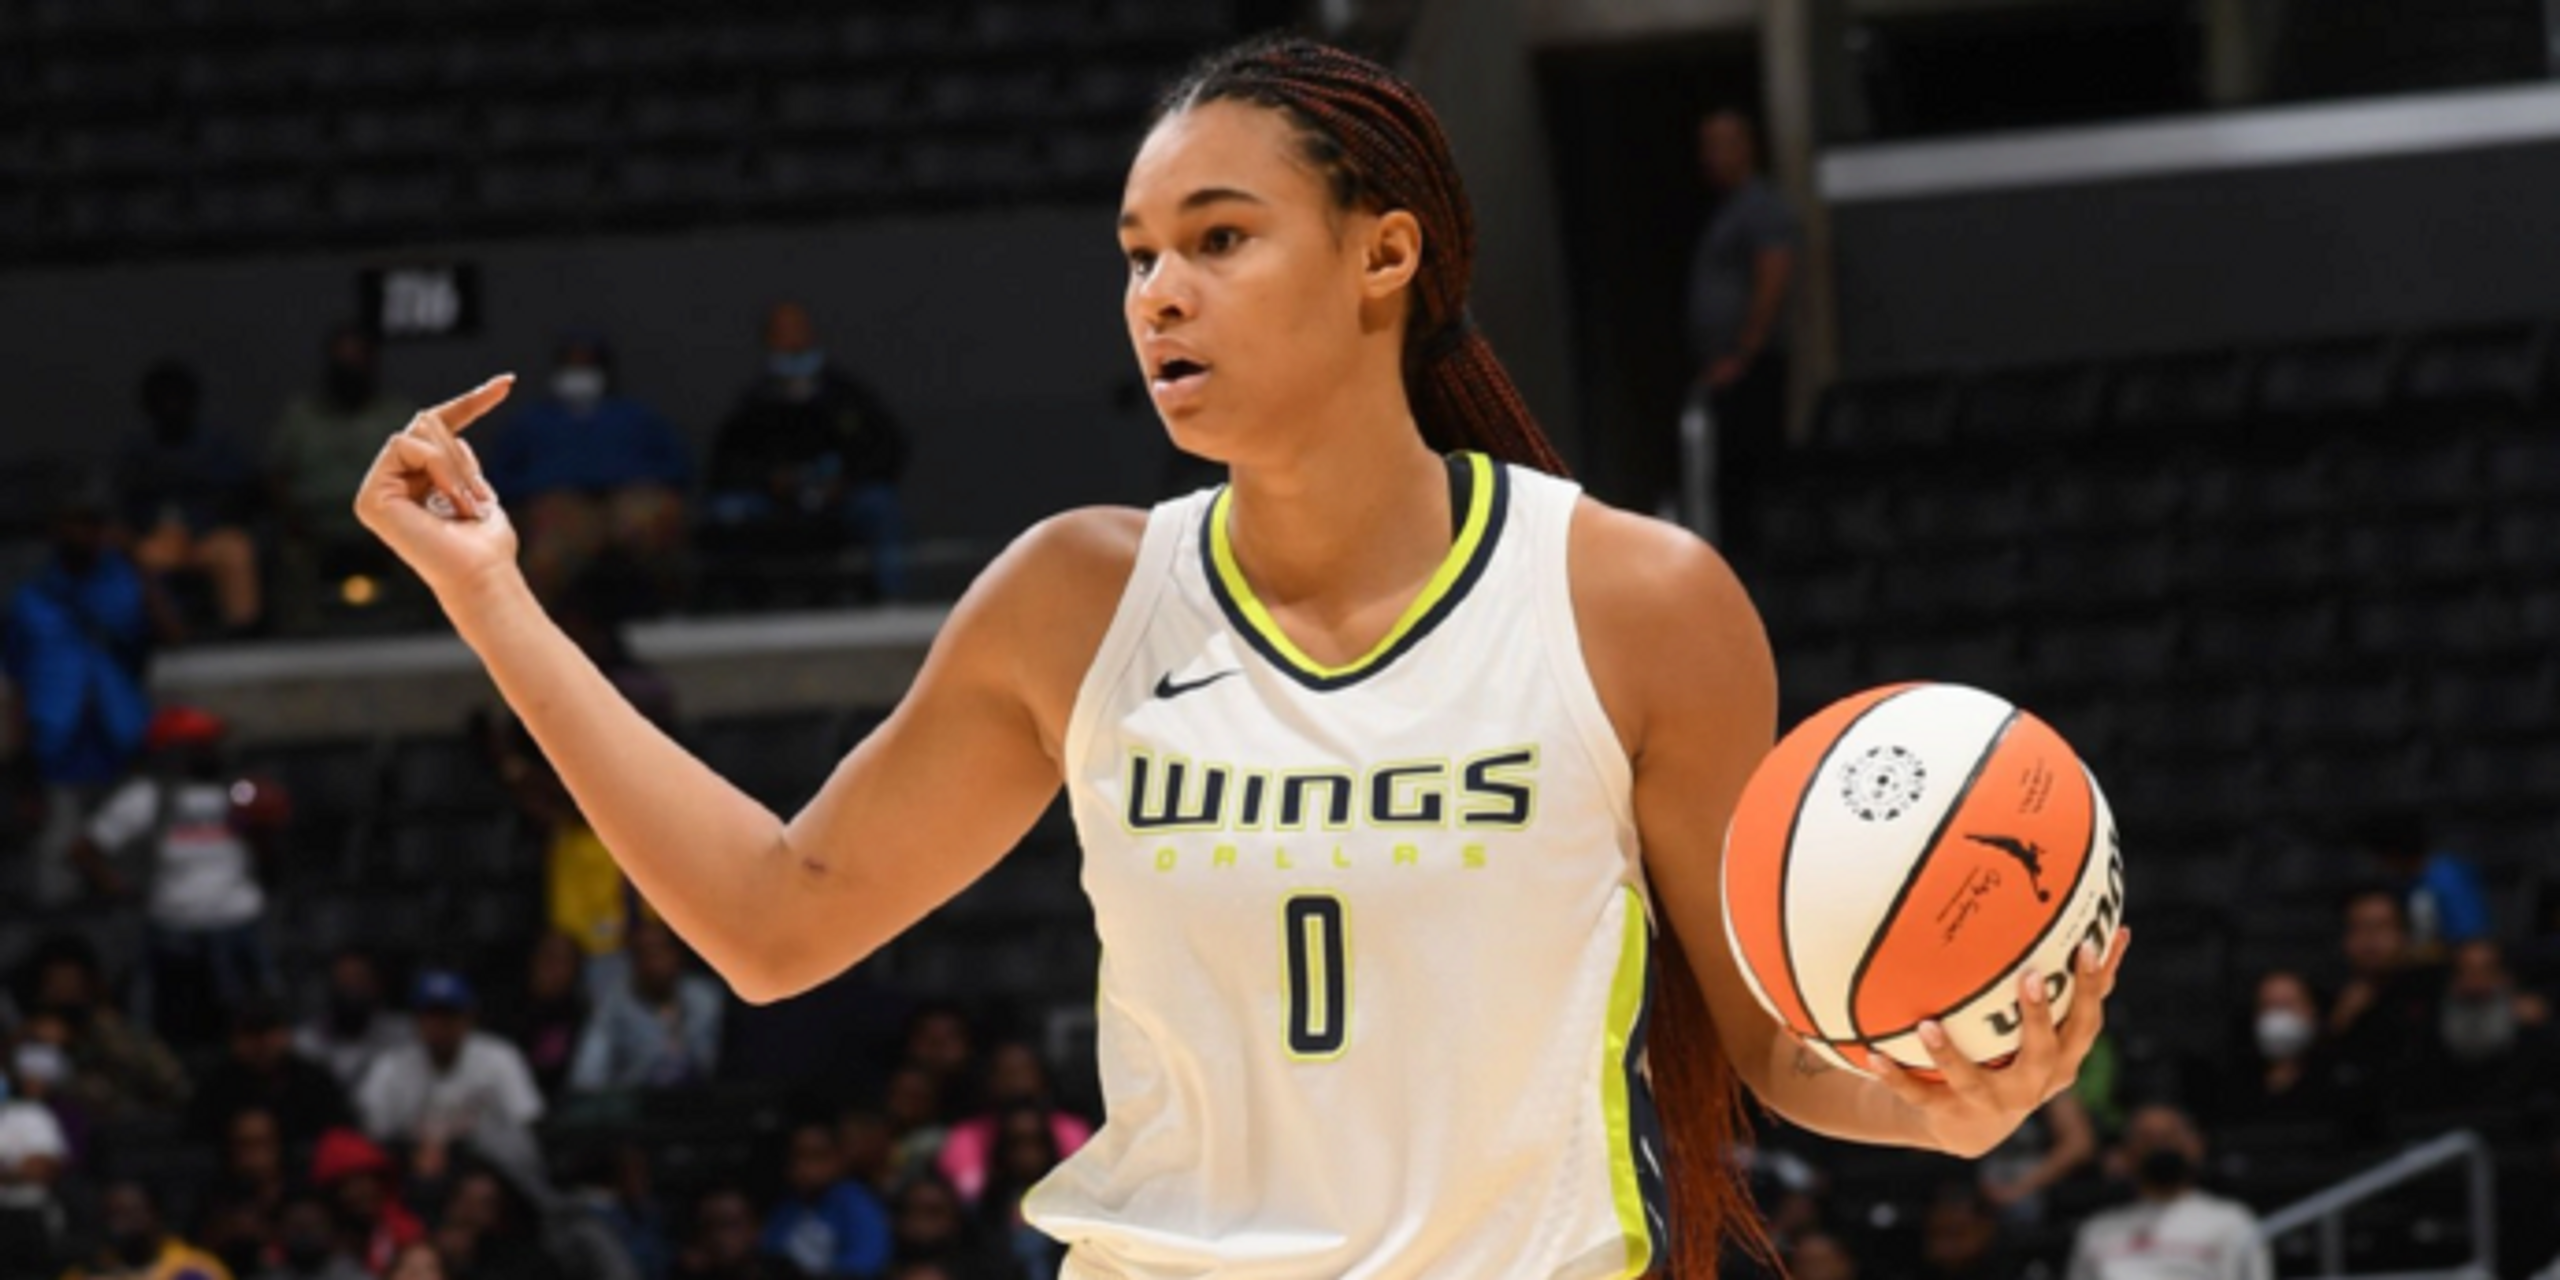 Explain one play: Satou Sabally's value at the 5 for the Dallas Wings